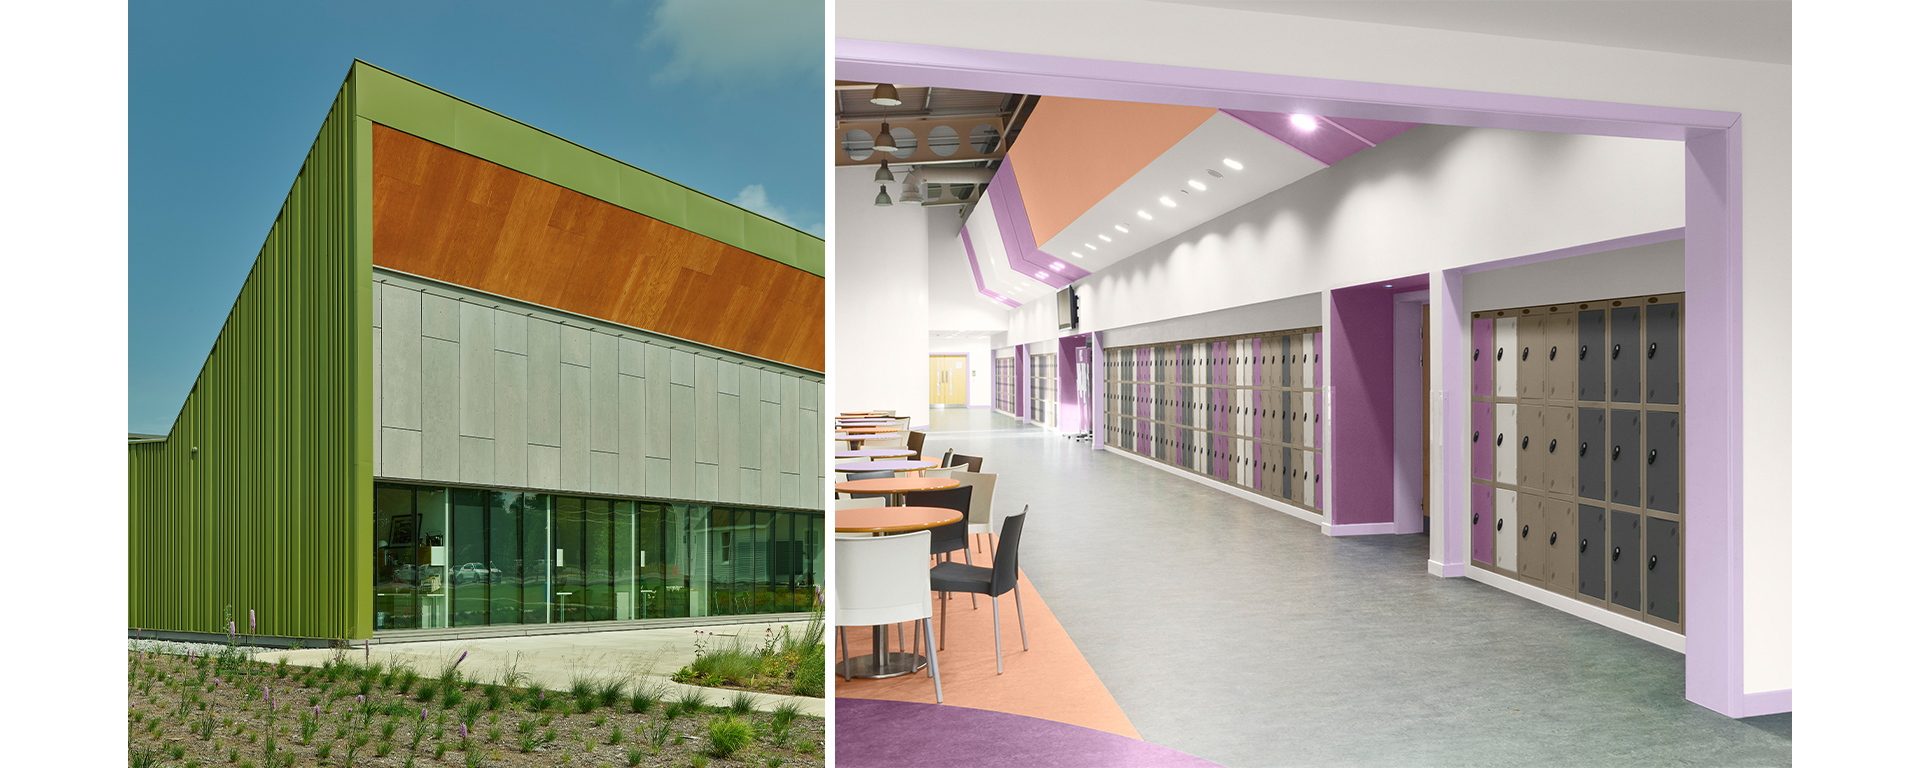 First image: Exterior of Thaden School with green metal paneling, glass doors, and modern architecture. Second image: Hallway and cafeteria of modern school with lockers, floors, and walls in various shades of gray and purple with light orange accents.